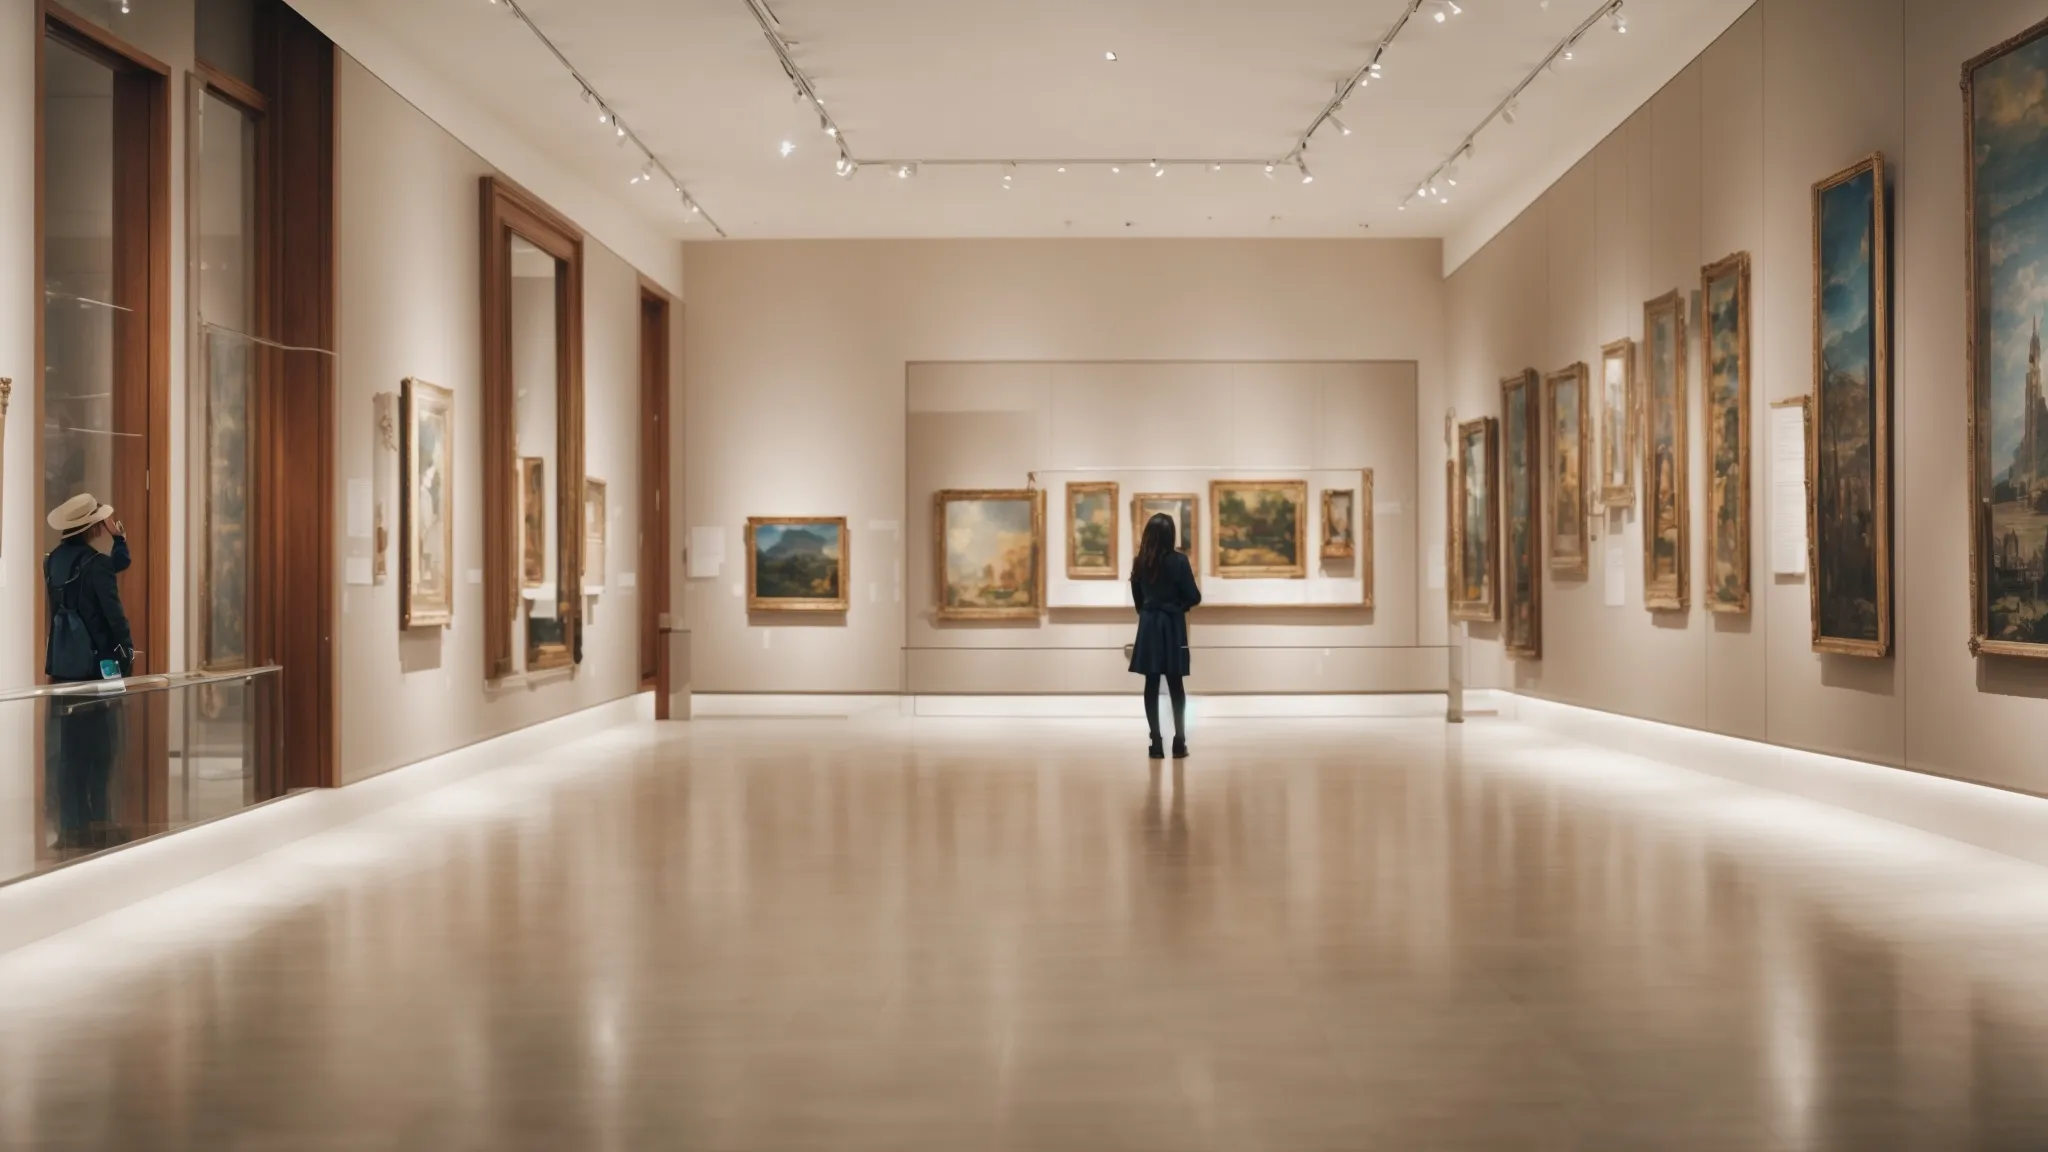 a person confidently navigating a clean, spacious museum gallery with clearly marked sections and interactive guideposts.